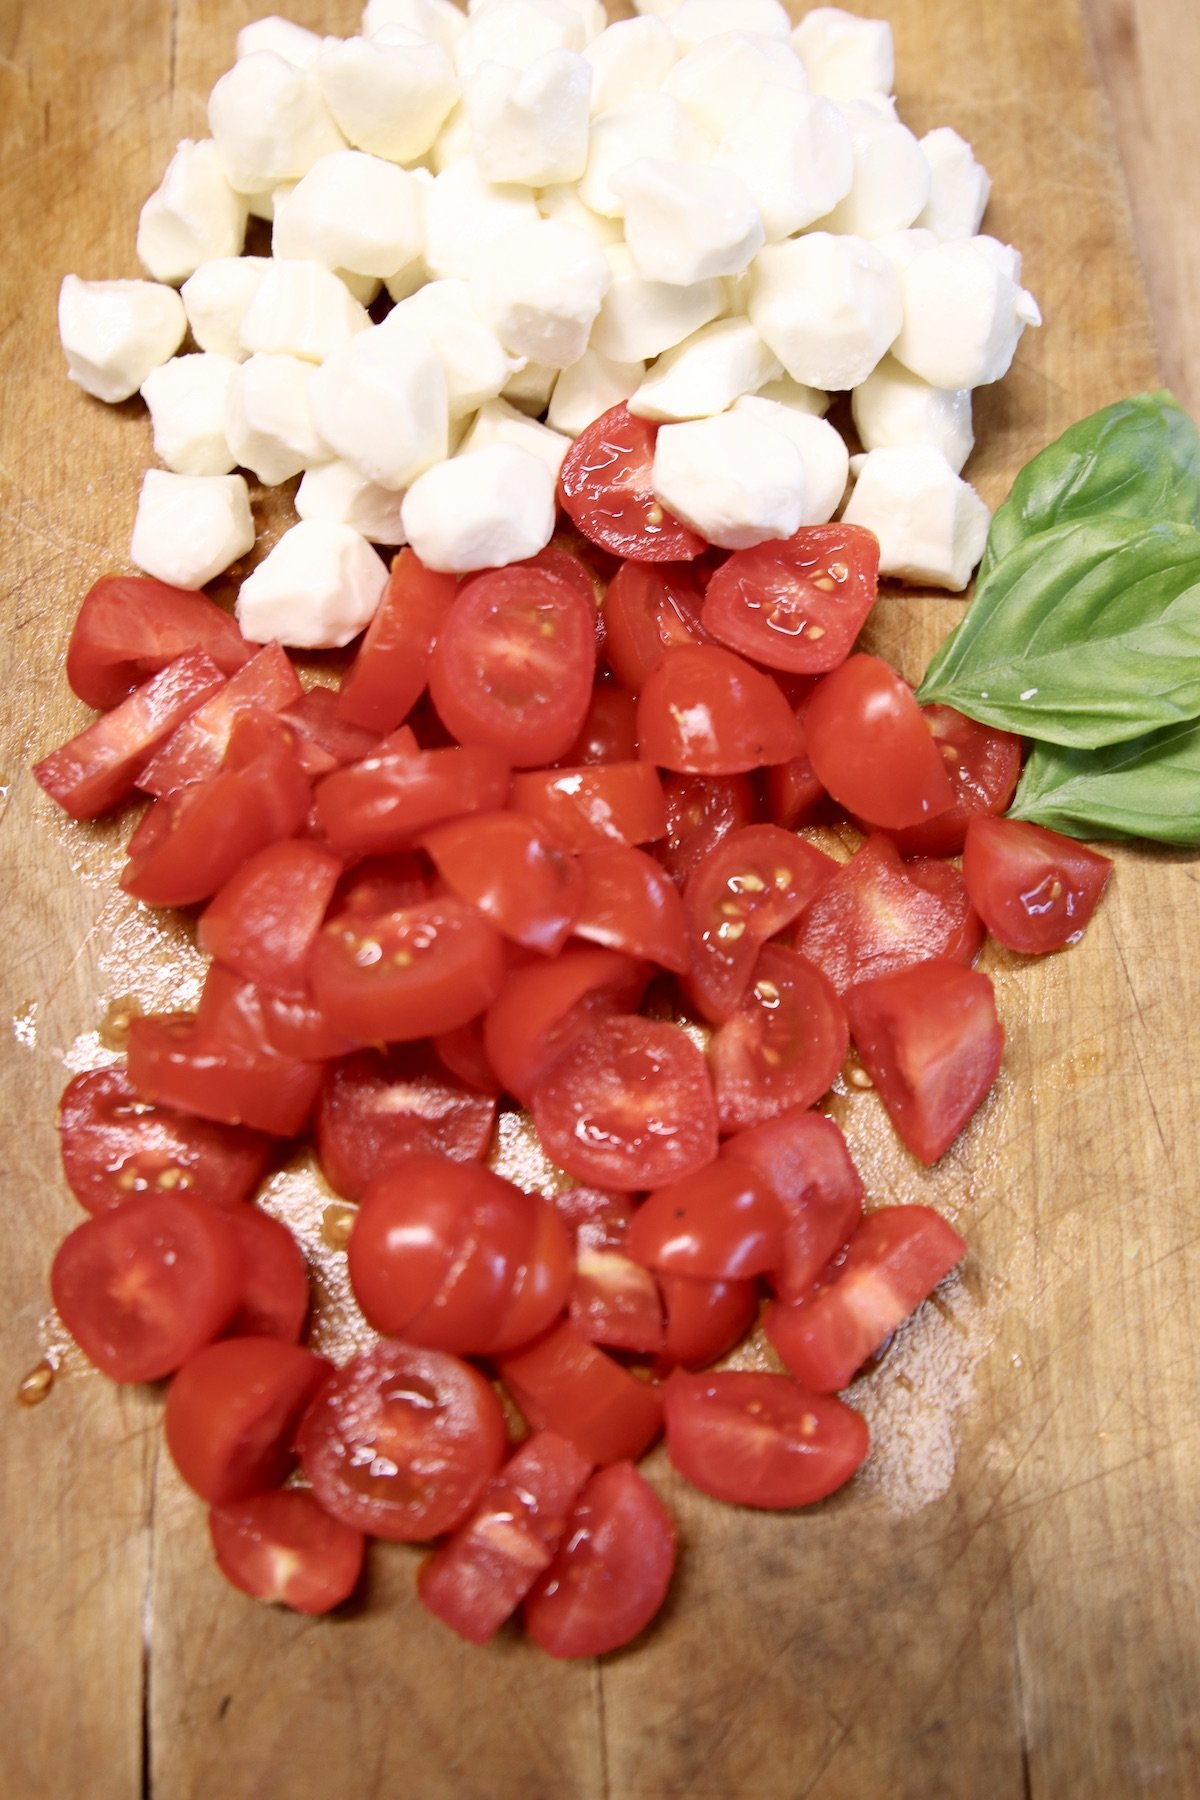 mozzarella balls, sliced cherry tomatoes and basil leaves on a cutting board